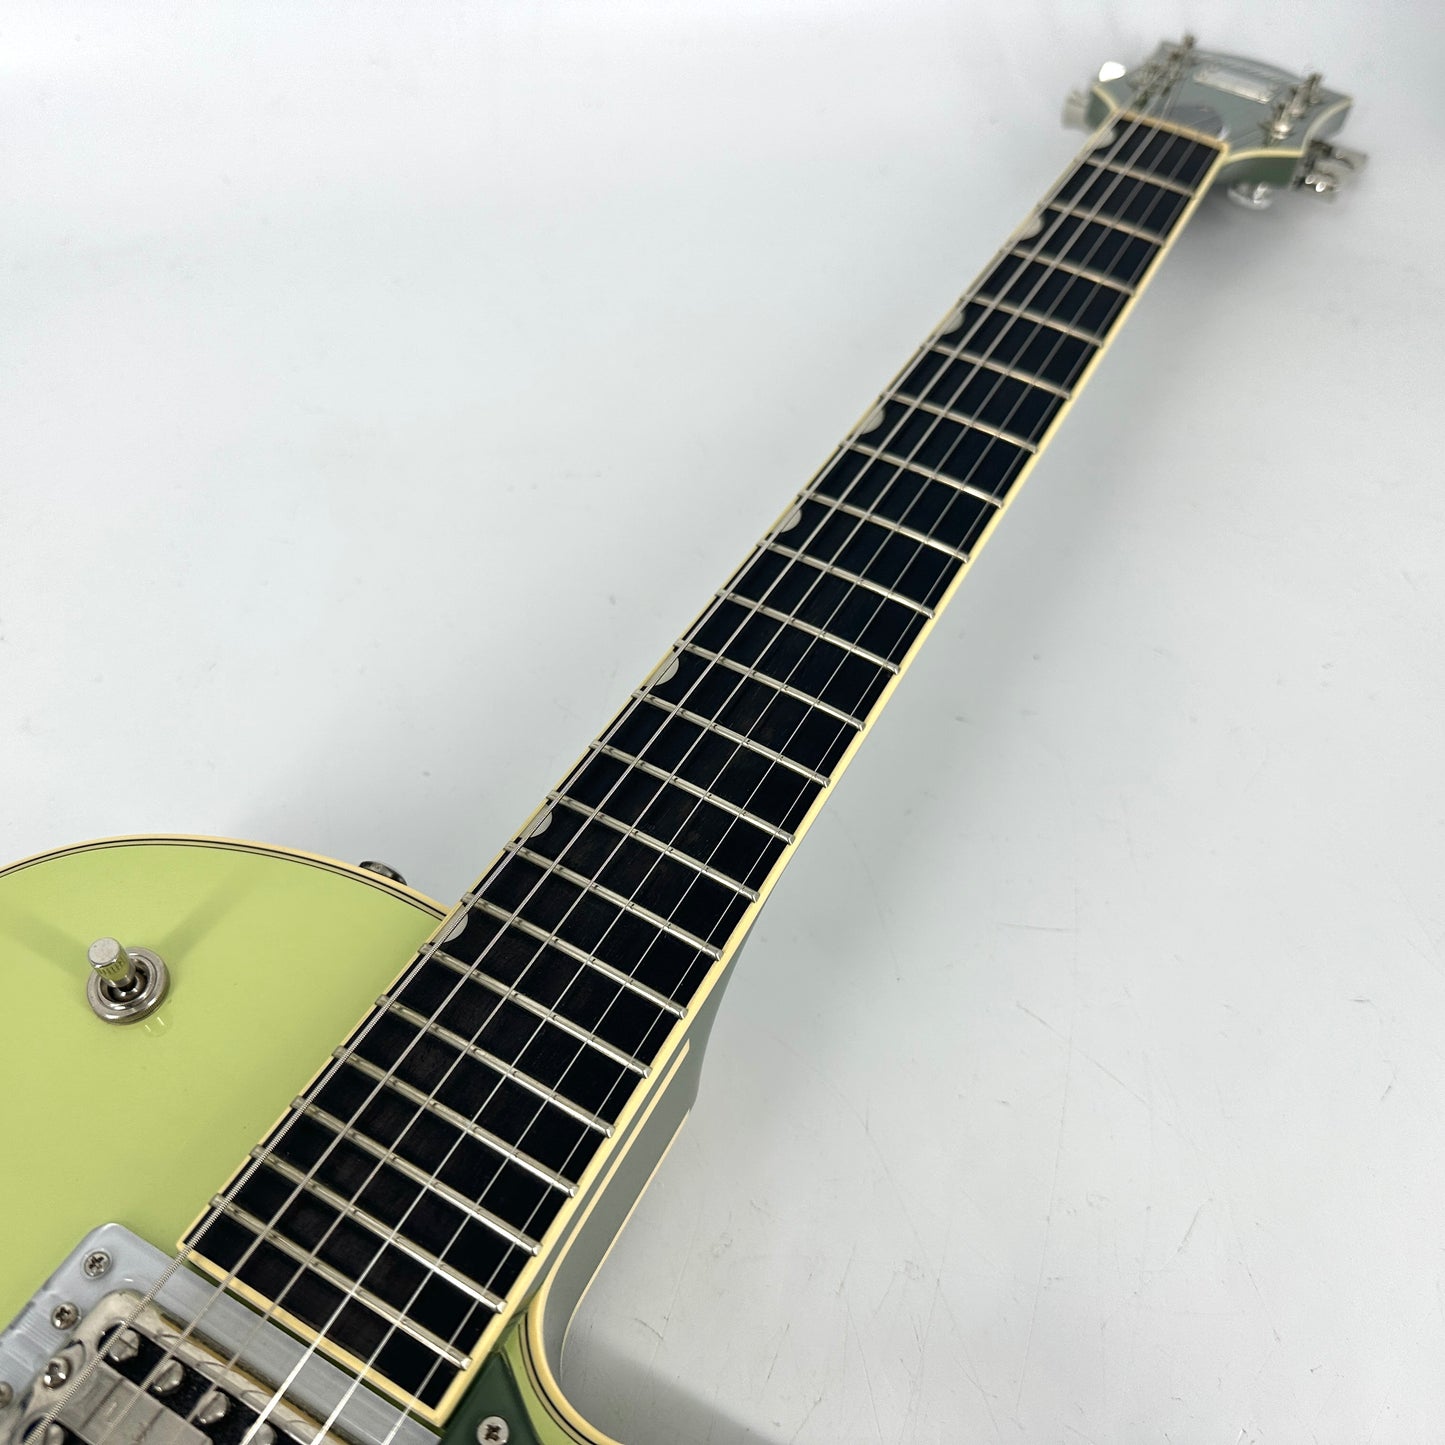 2020 Gretsch G6659T Players Edition Broadkaster Jnr - 2 Tone Smoke Green